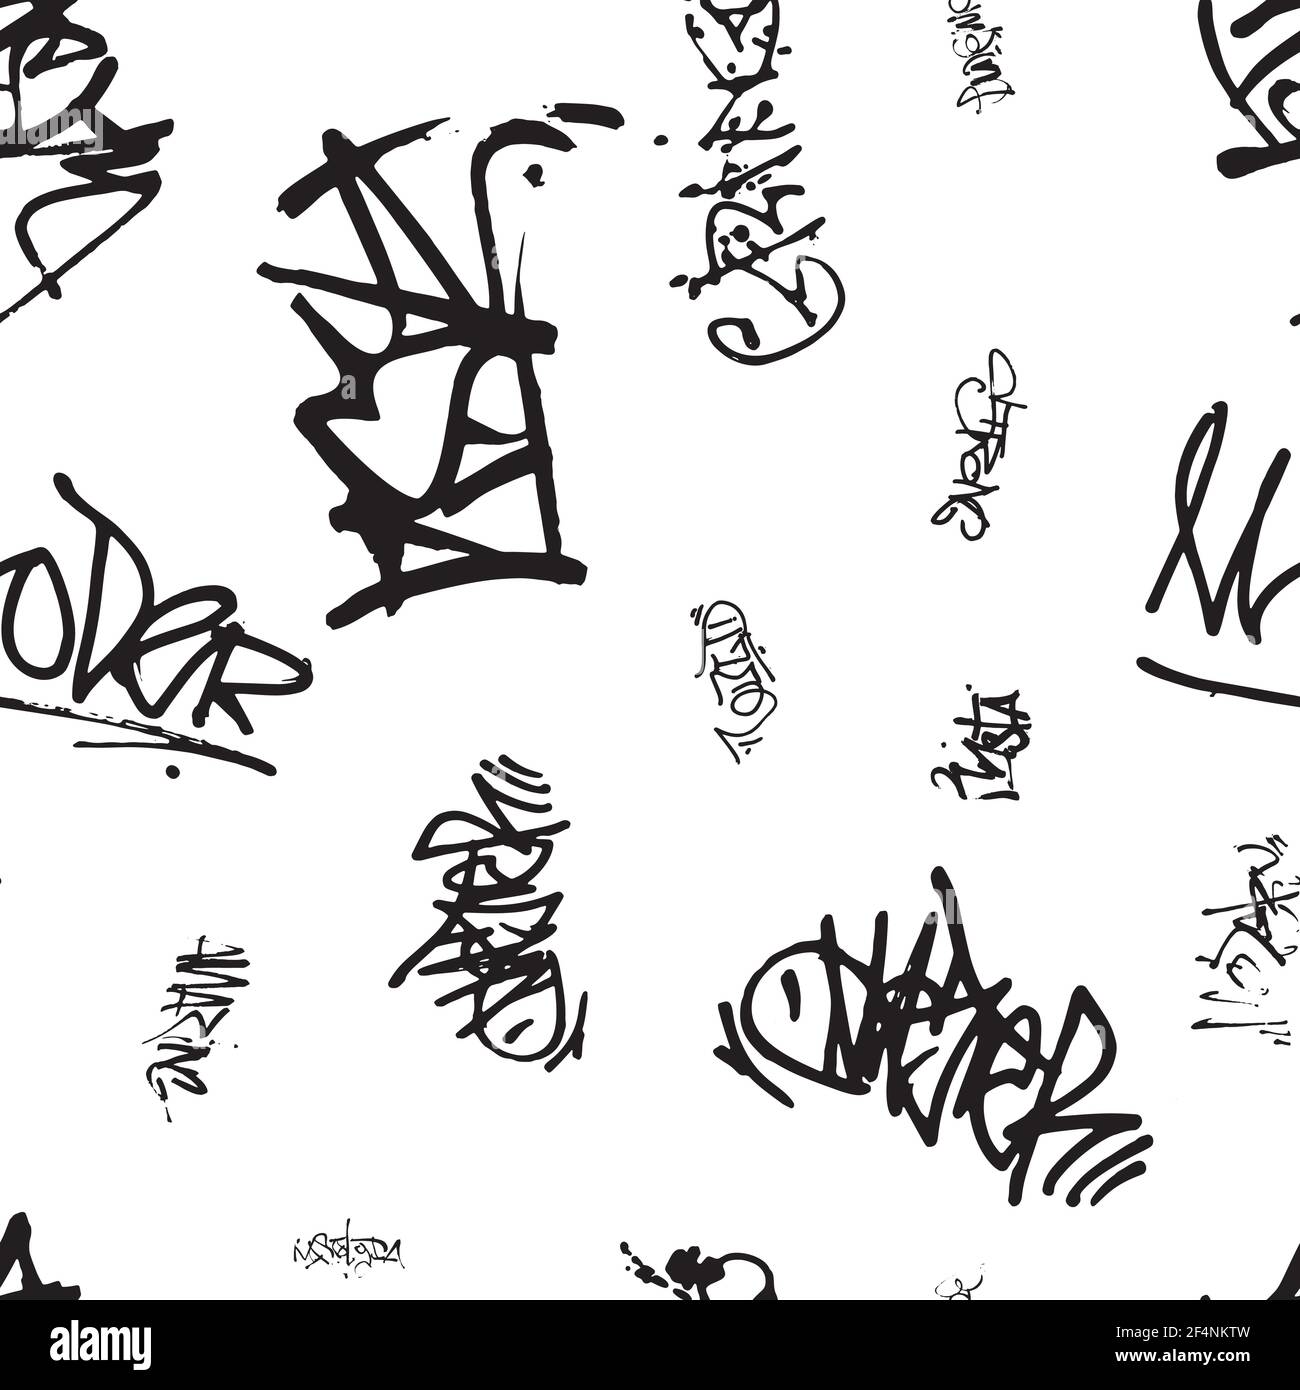 Vector graffiti seamless pattern with abstract tags, letters